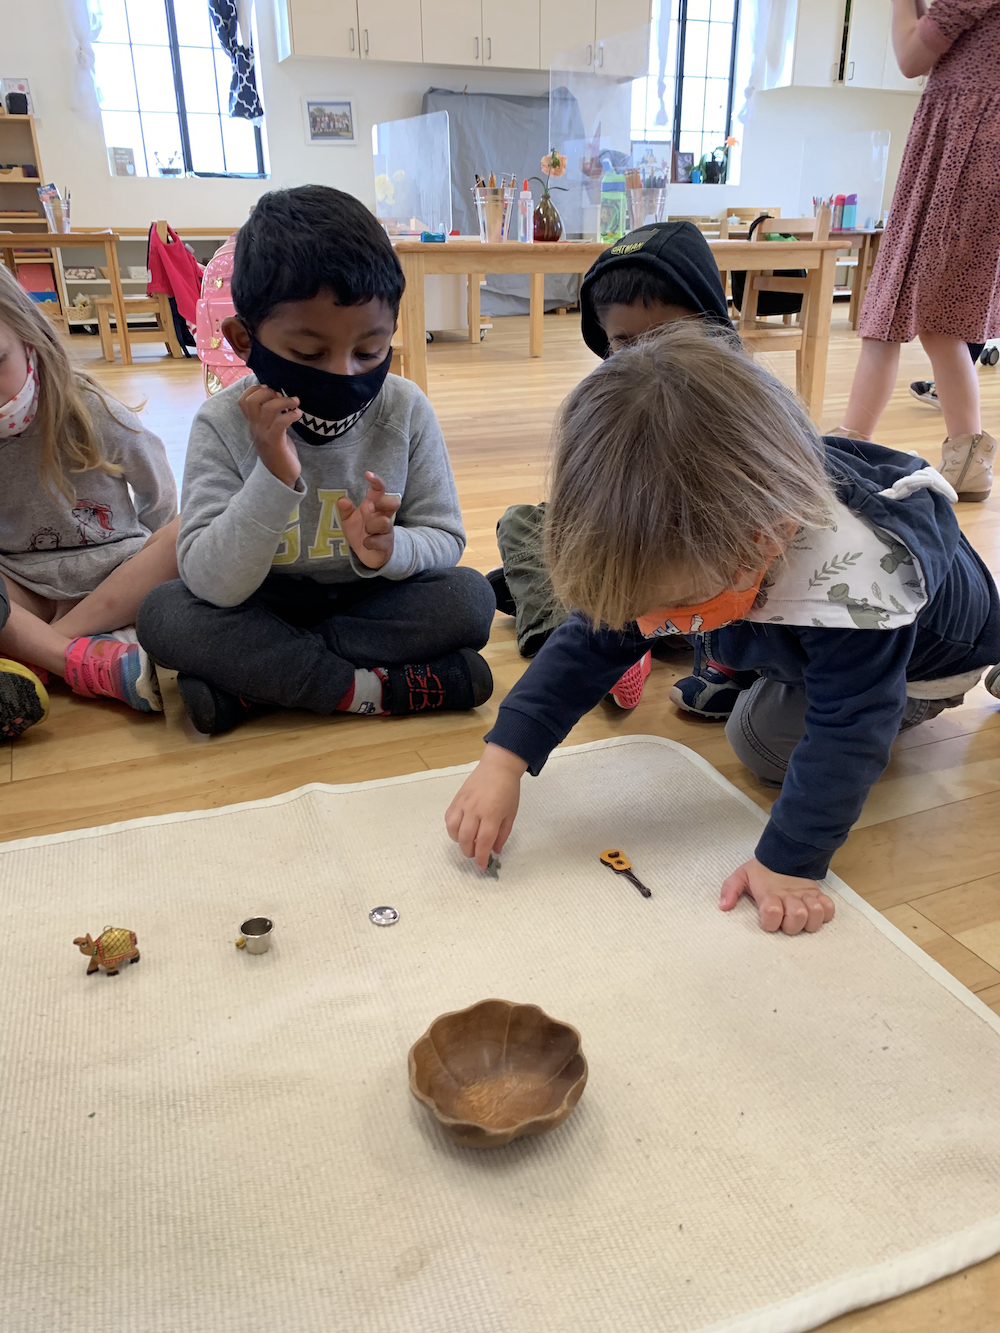 Toddlers in a Montessori classroom playing with small objects